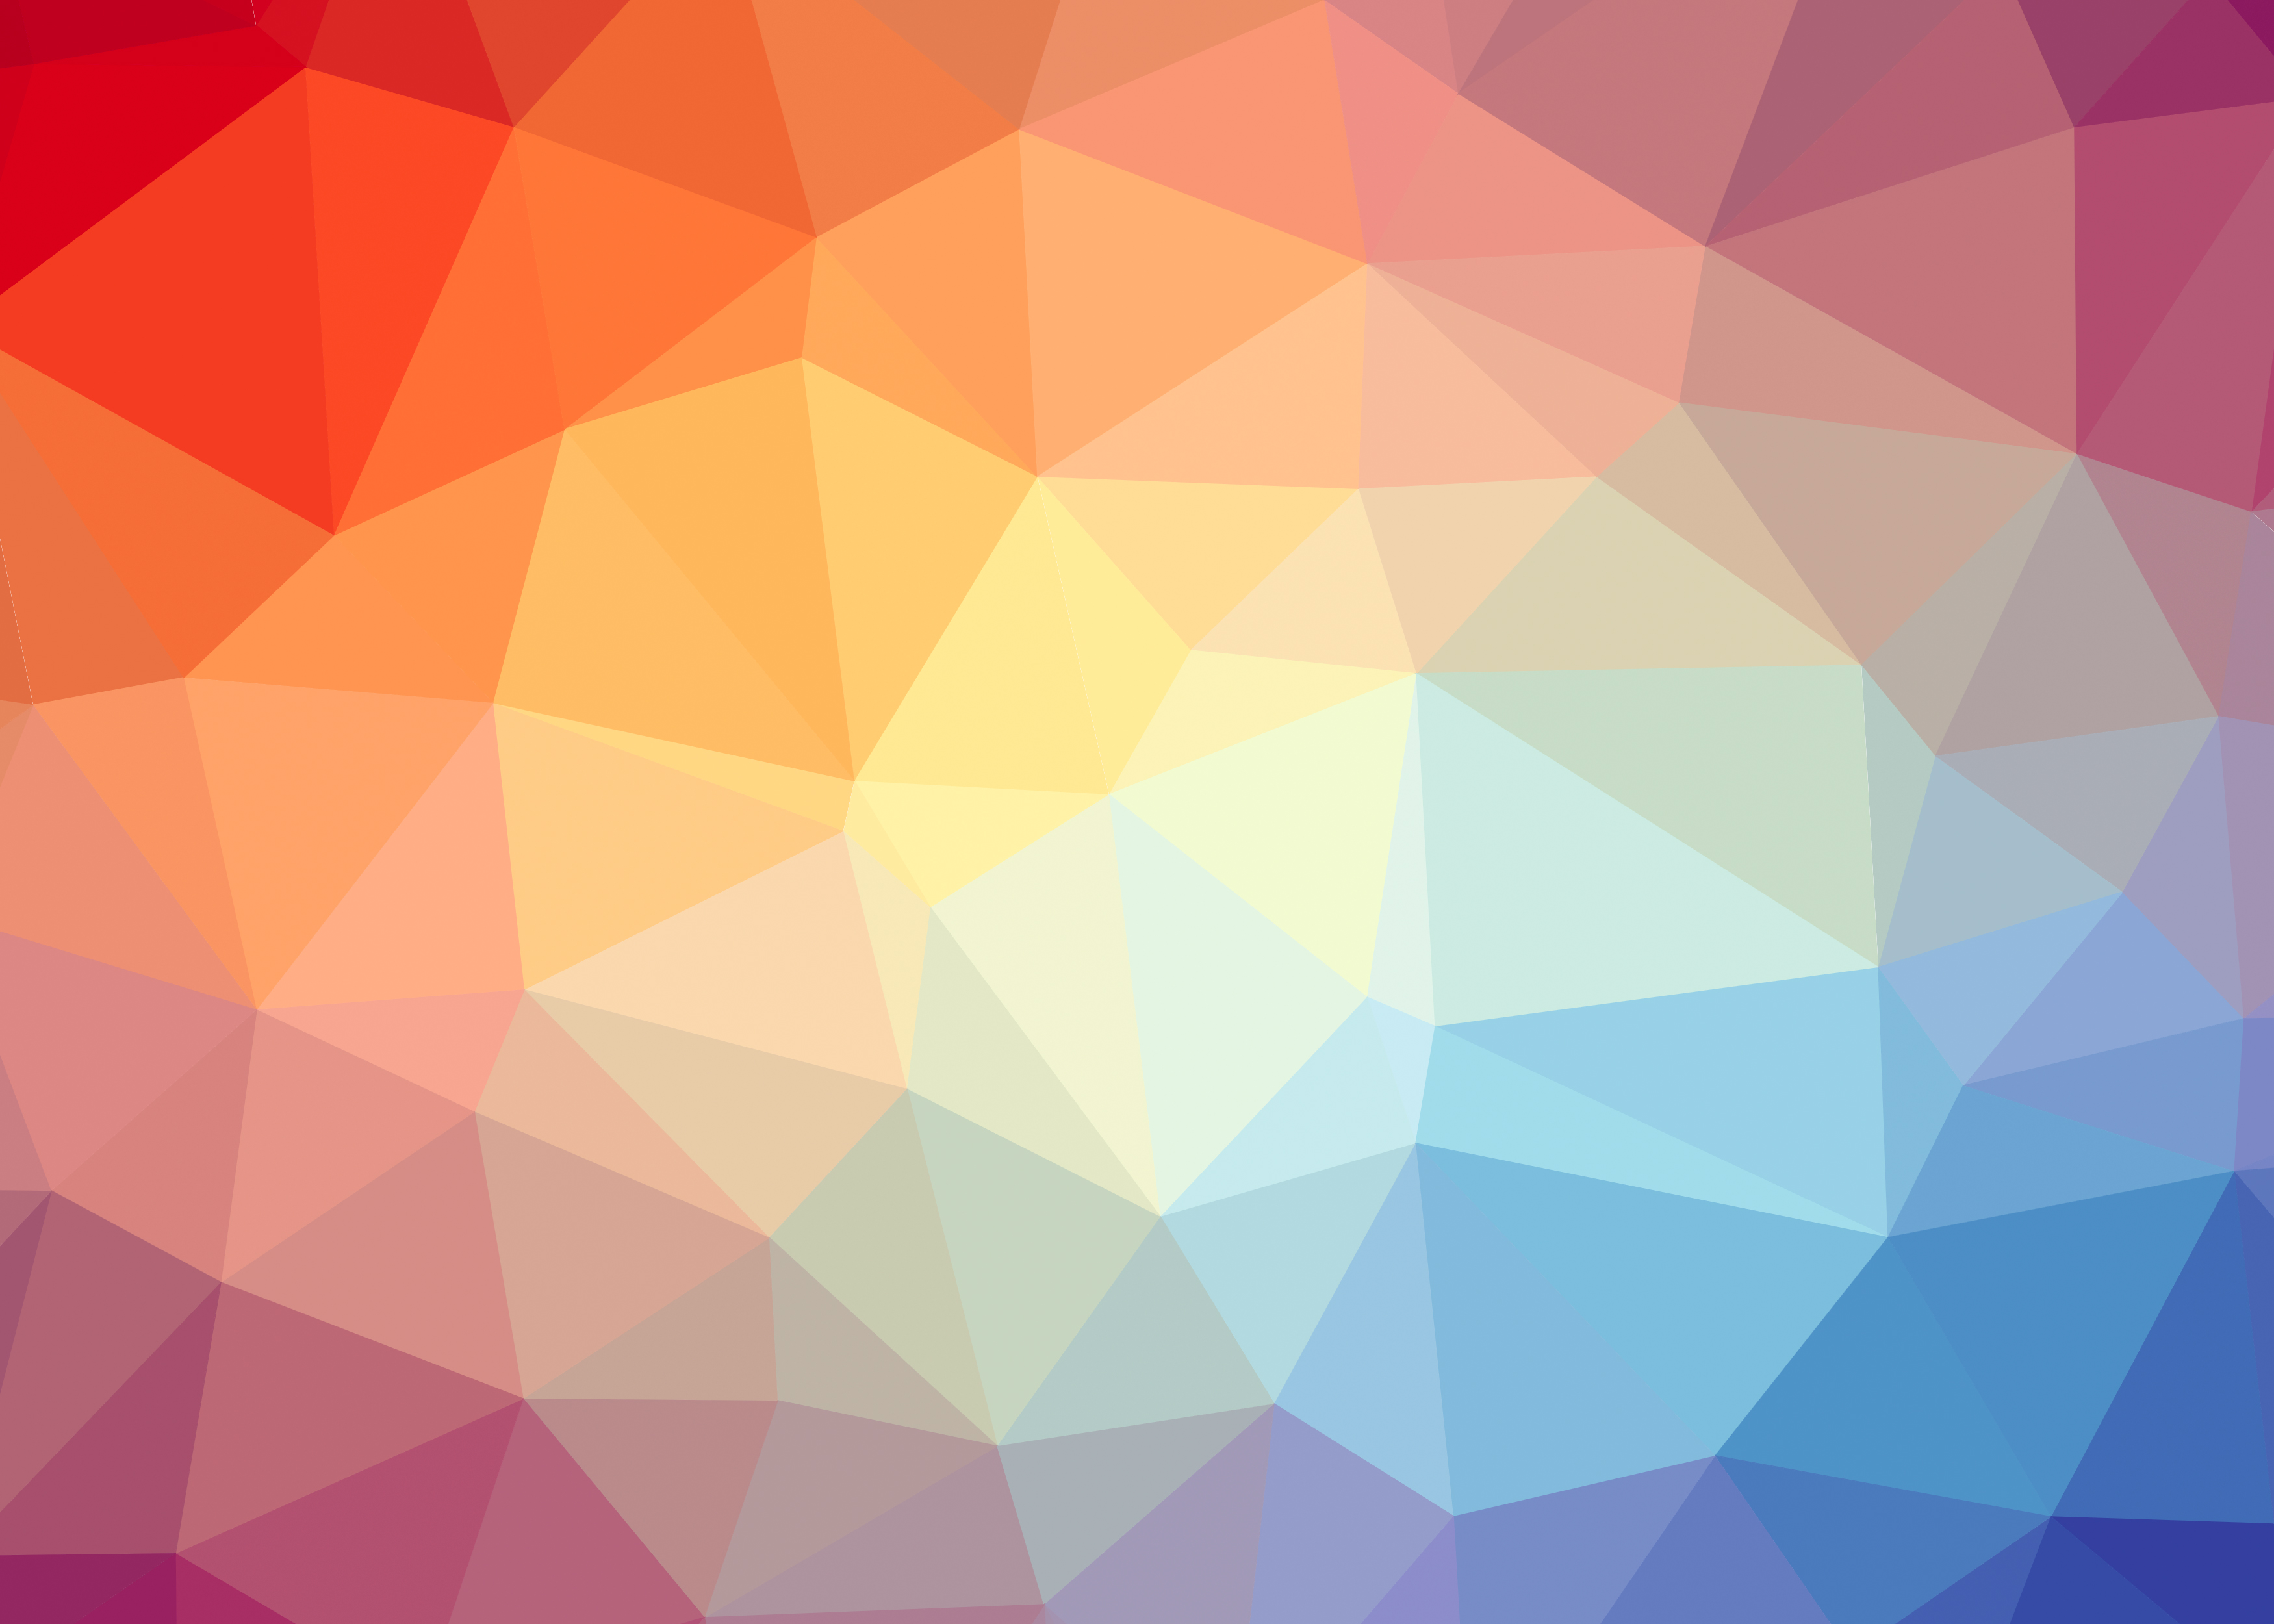 20 Awesome Shapes Wallpapers